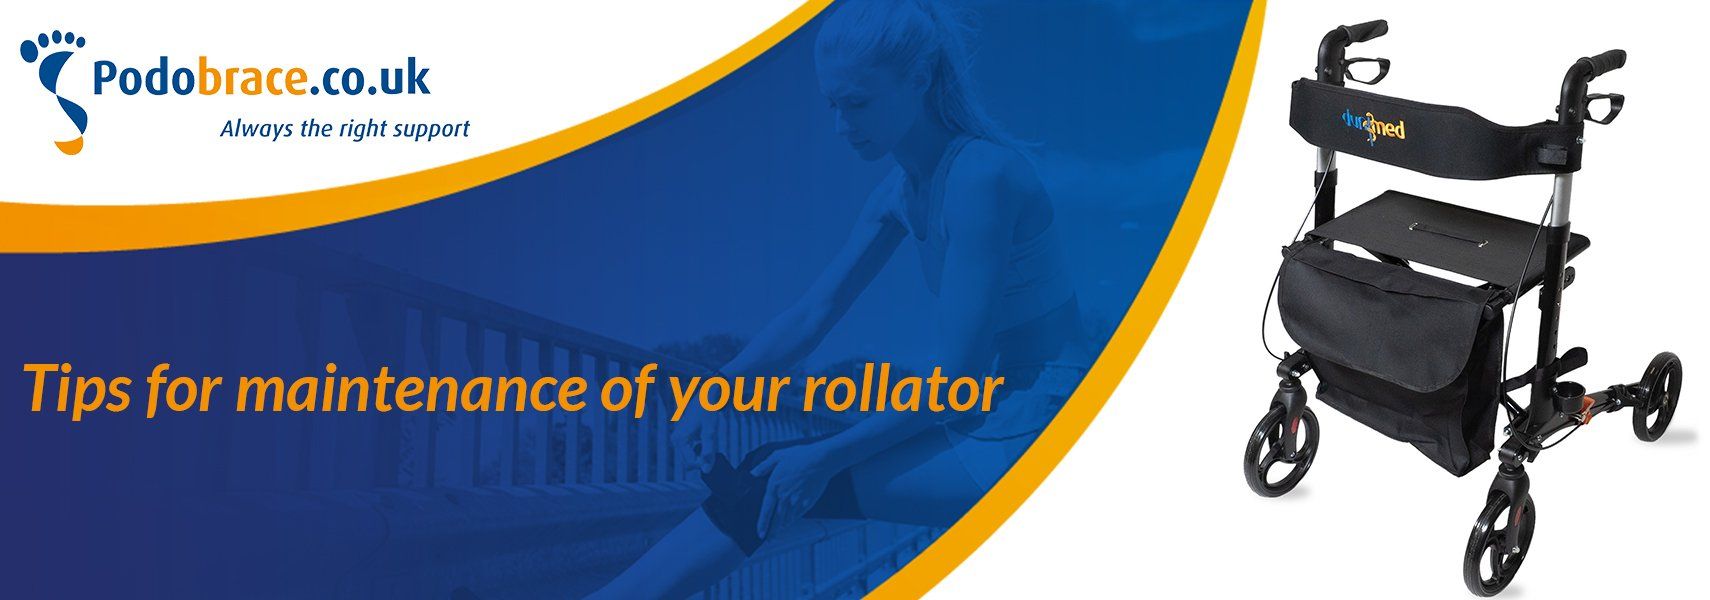 tips for maintenance of your rollator